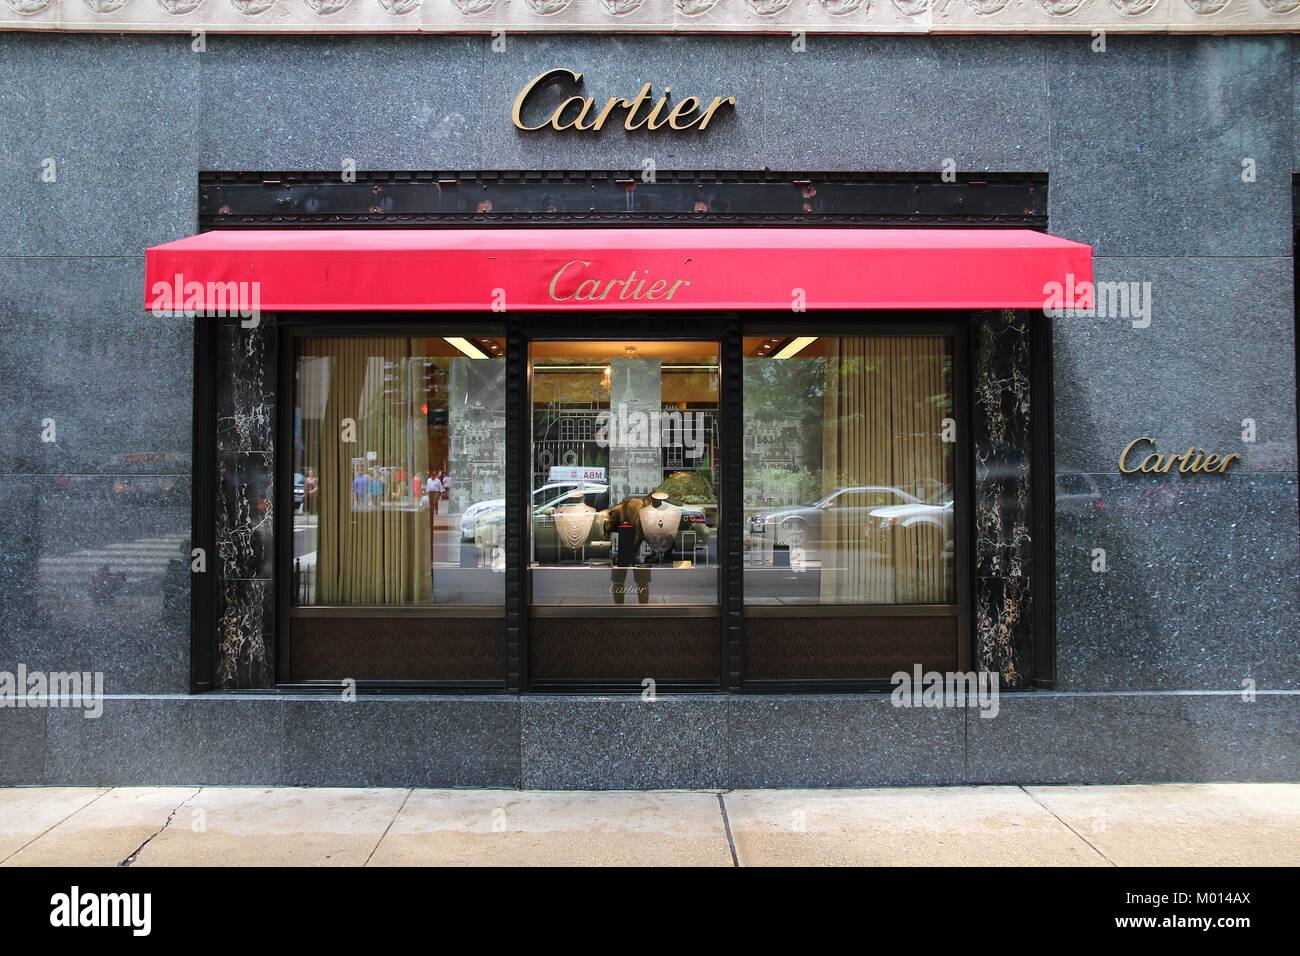 CHICAGO - JUNE 26: Cartier store at 